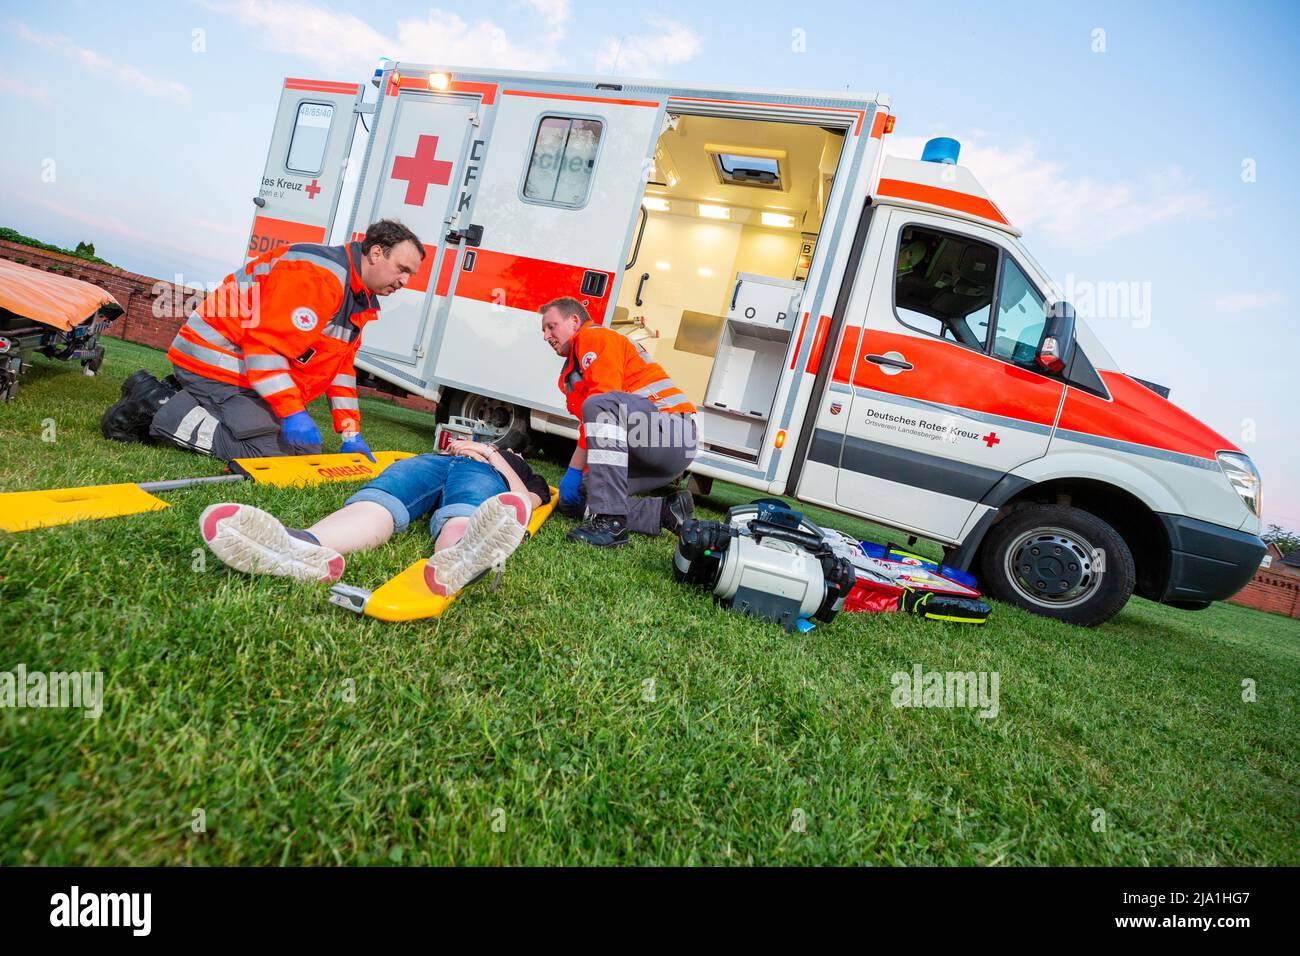 Landesbergen, Germany. May 11, 2022: German Paramedics from Deutsches Rotes Kreuz, works at an emergency site. Deutsches Rotes Kreuz is the national R Stock Photo